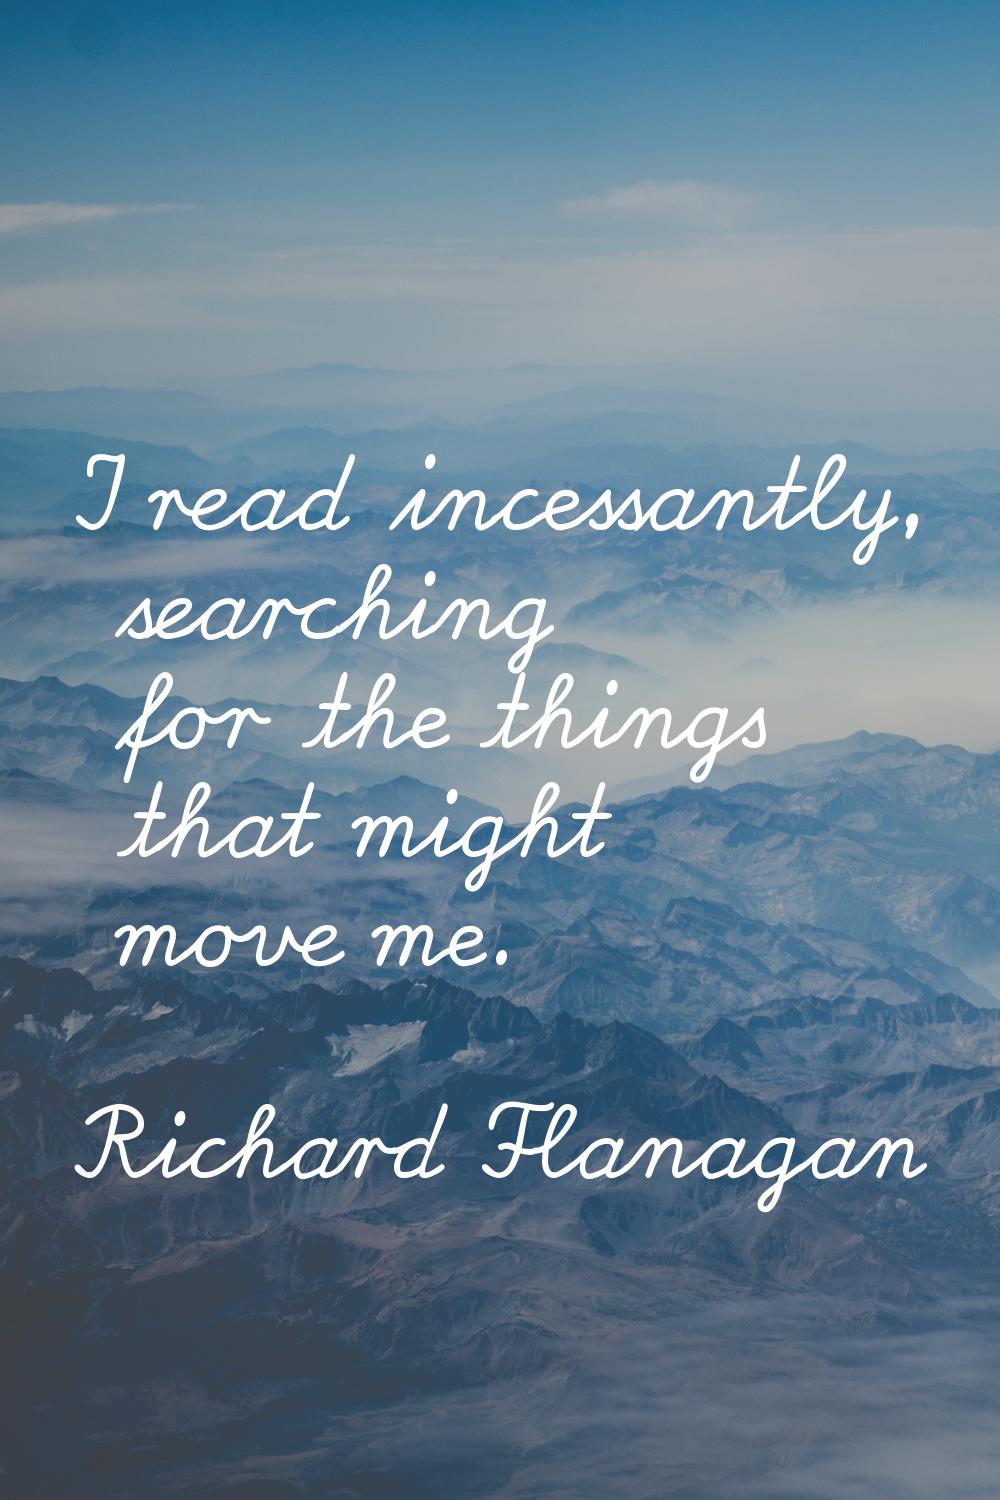 I read incessantly, searching for the things that might move me.